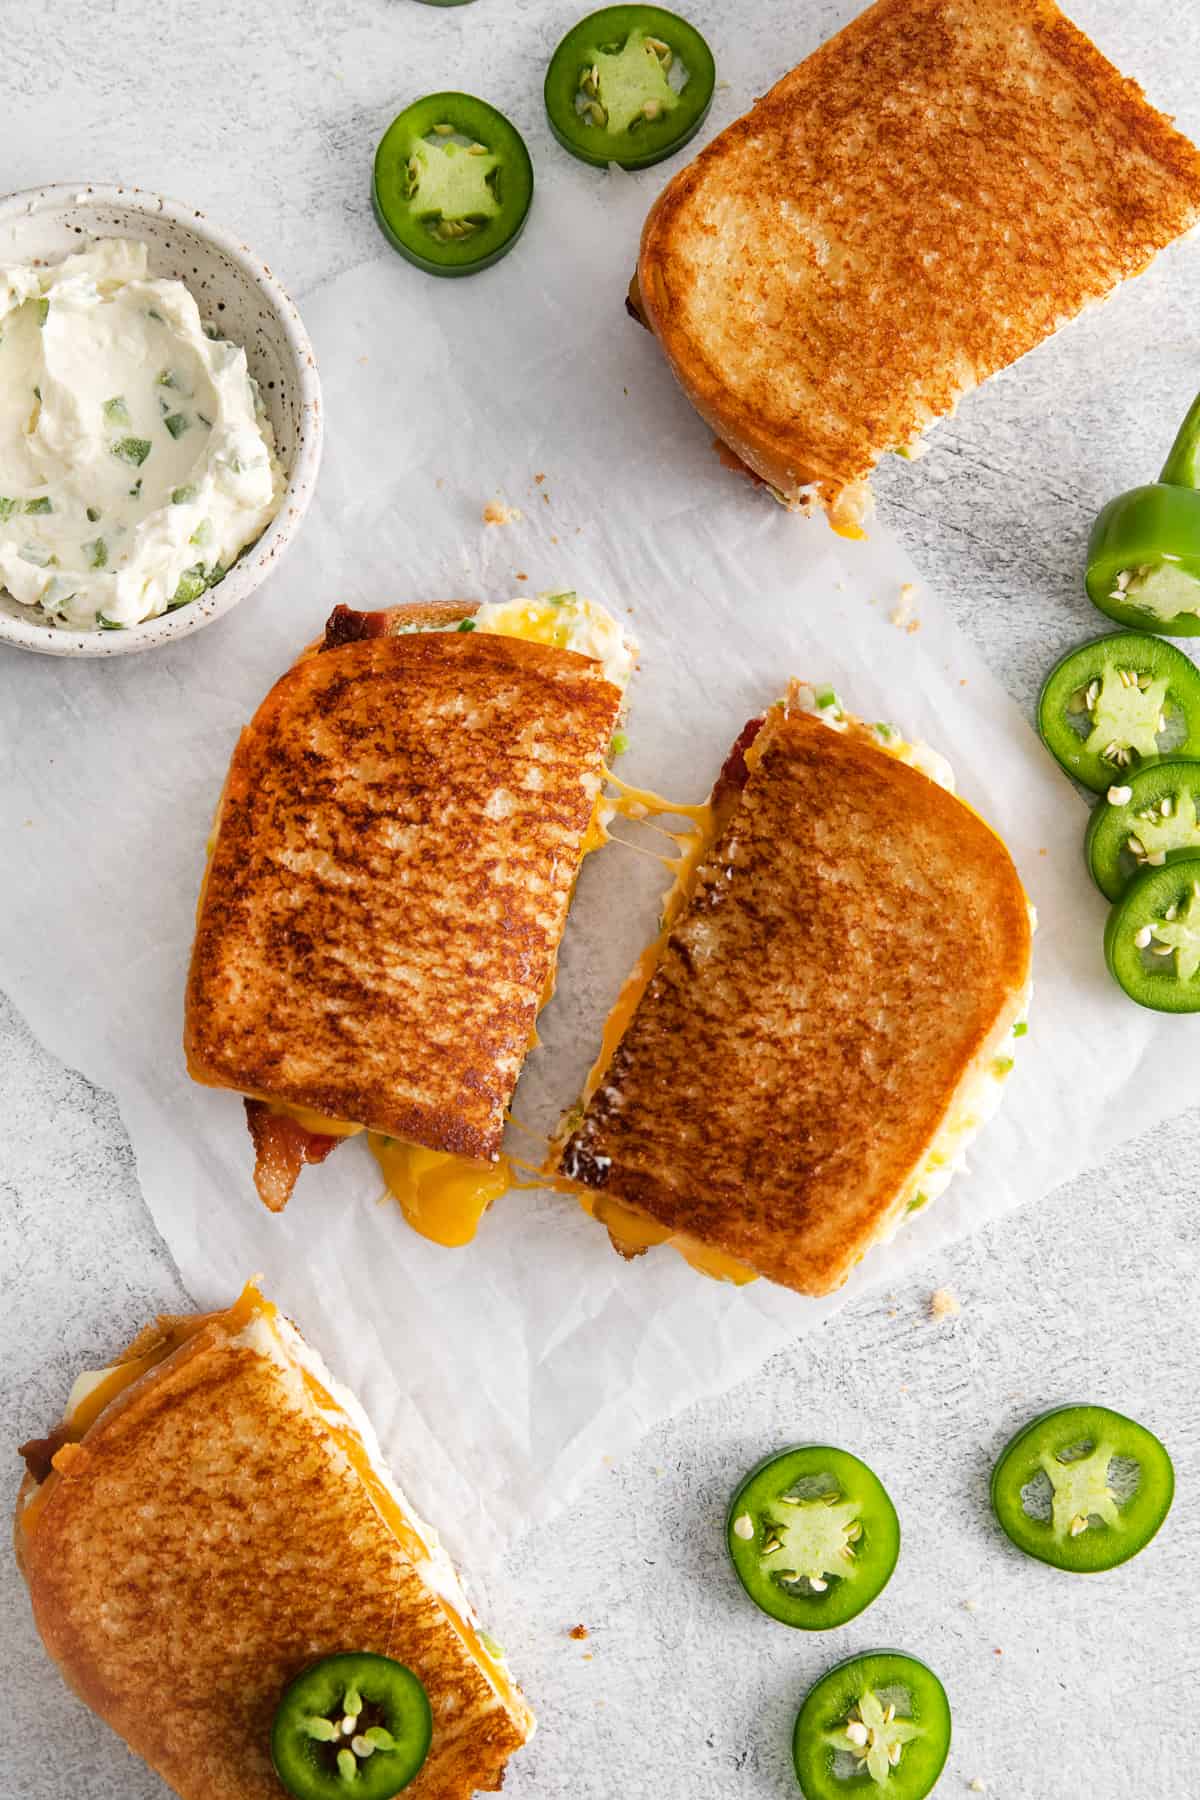 Jalapeno popper grilled cheese sandwich sliced in half.